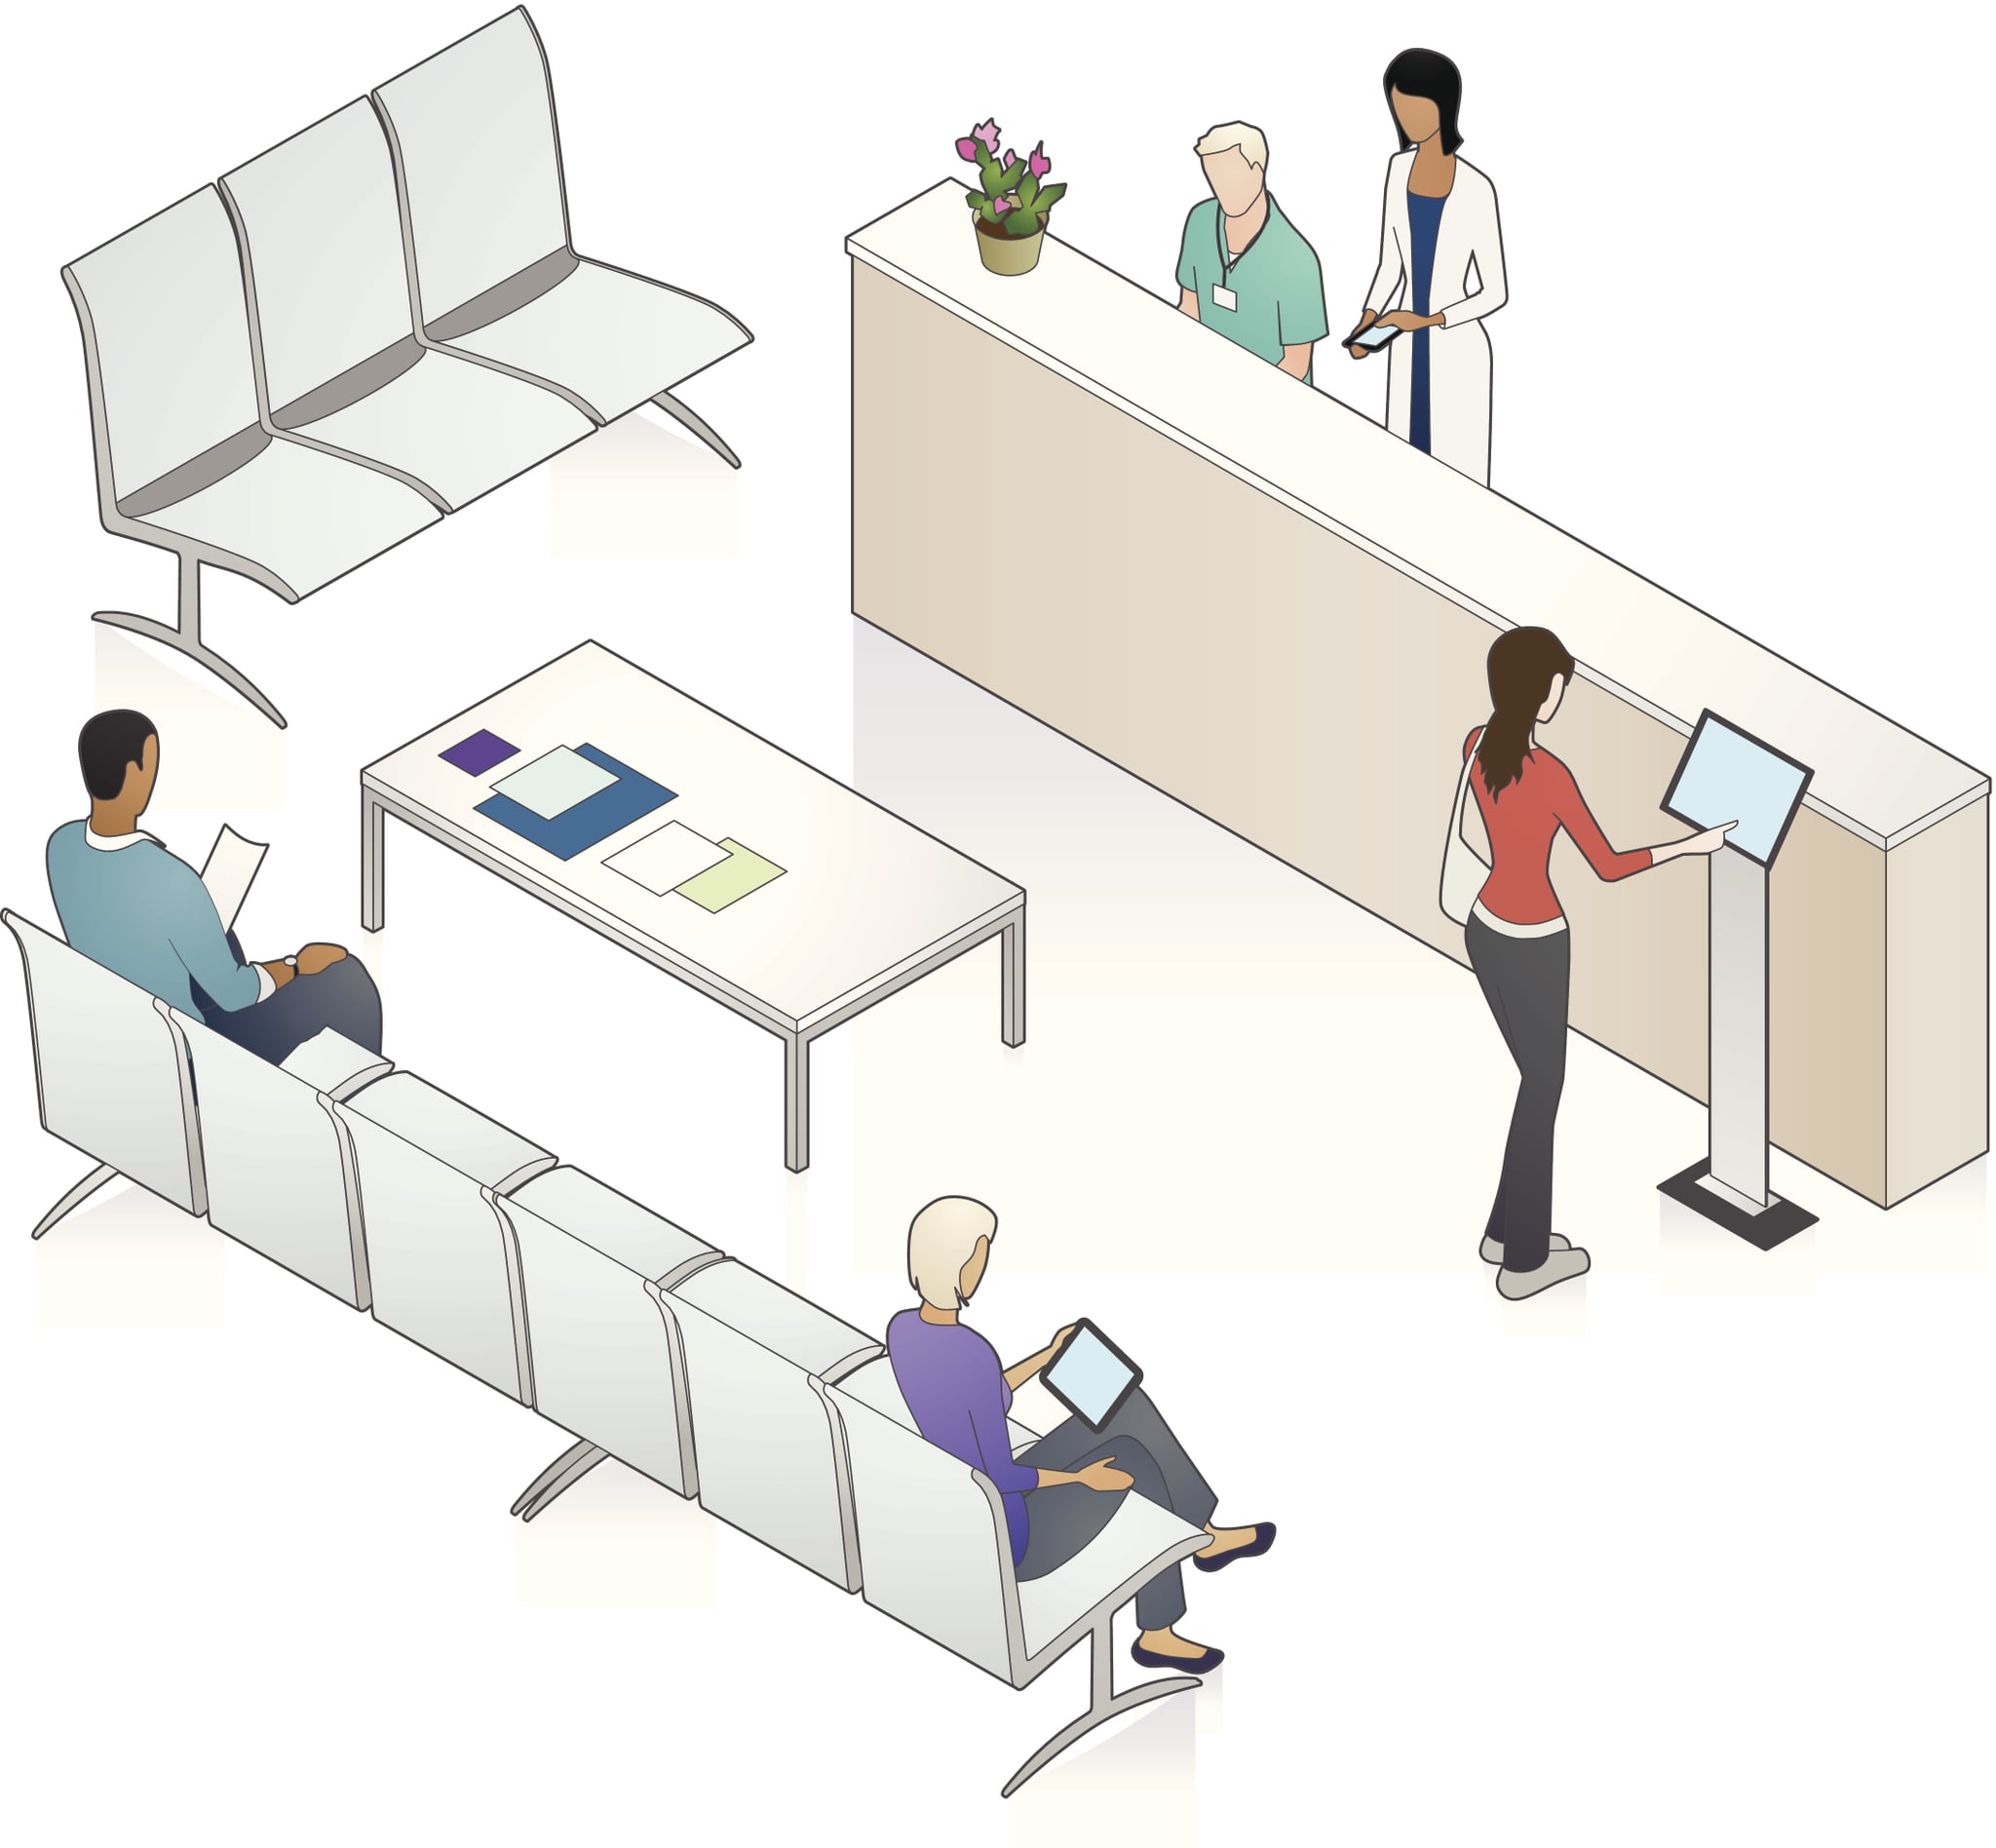 Patients and medical professionals in a waiting area, including a touch-screen check-in kiosk.